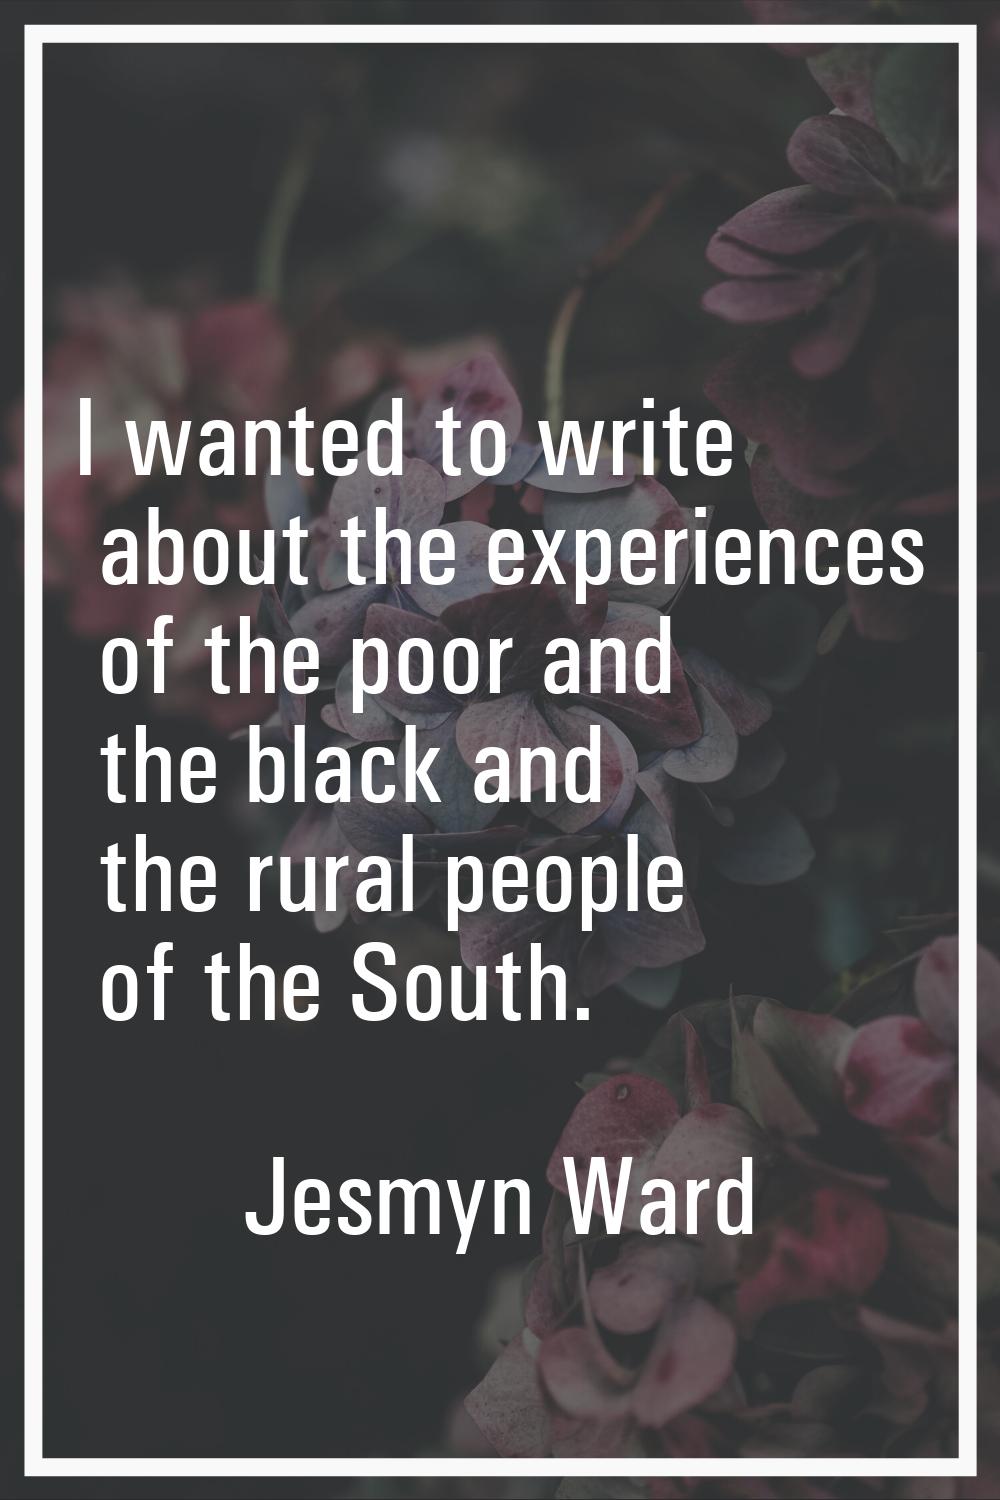 I wanted to write about the experiences of the poor and the black and the rural people of the South